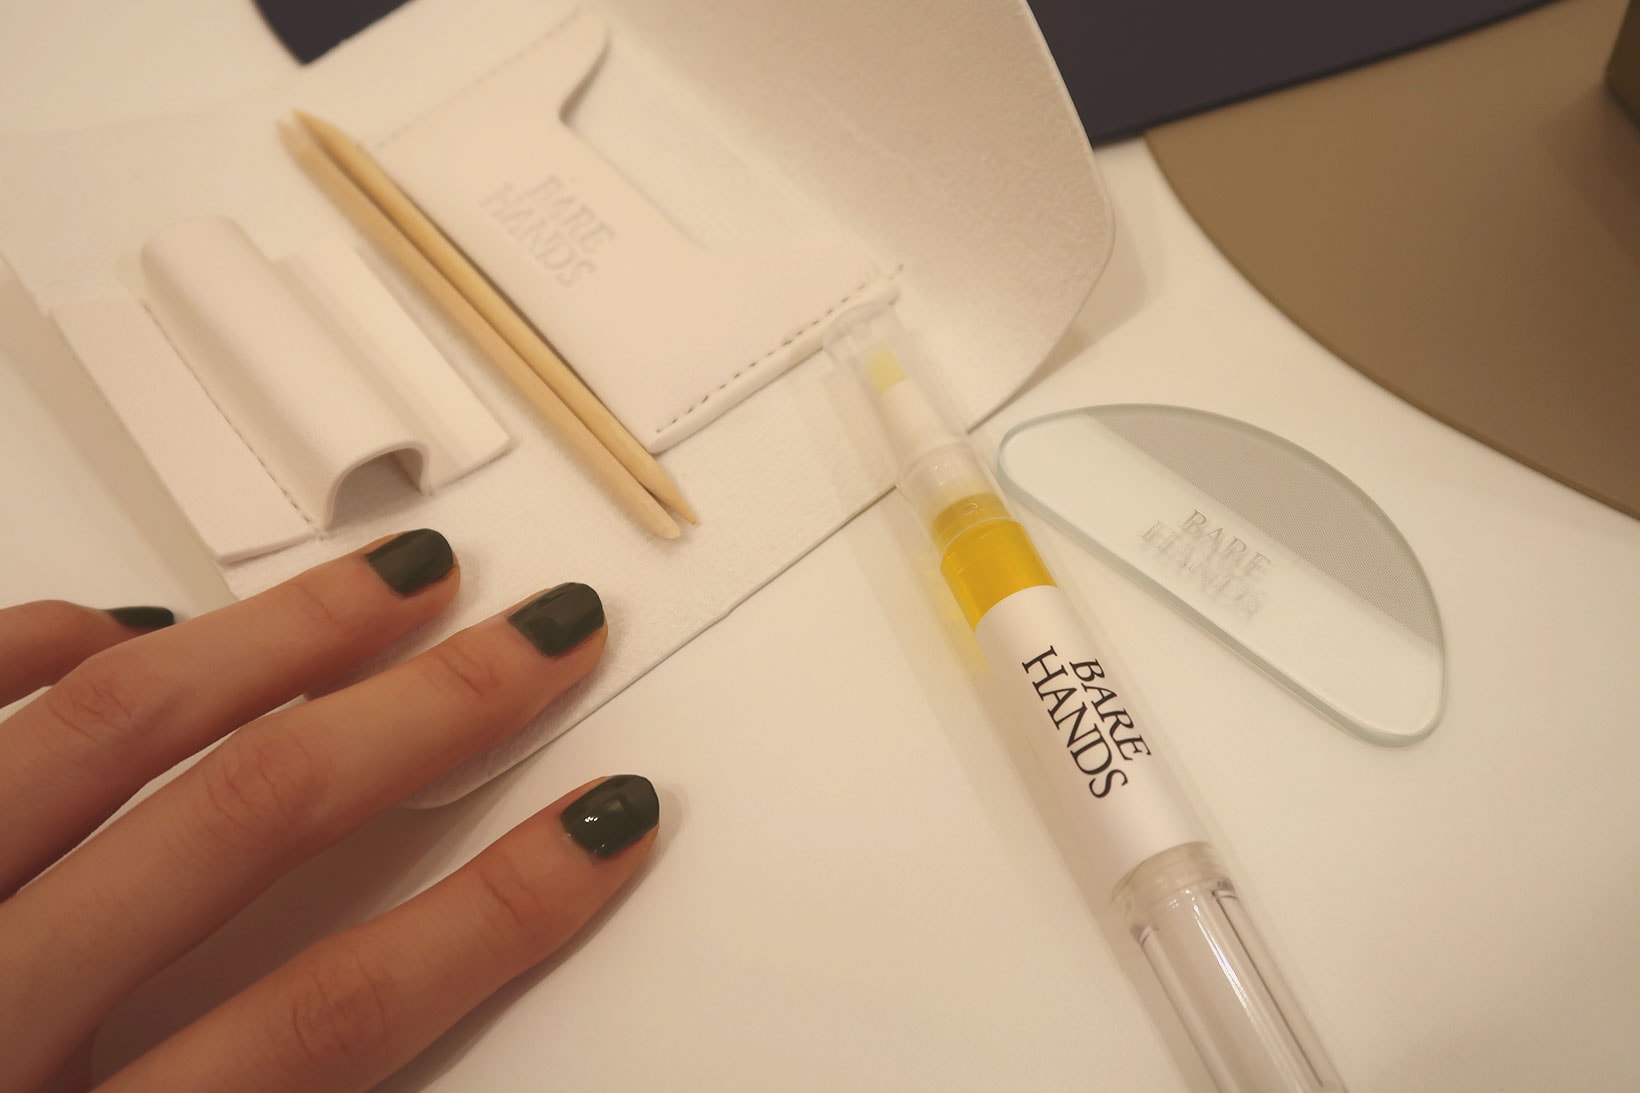 The Dry Gloss Manicure Kit.